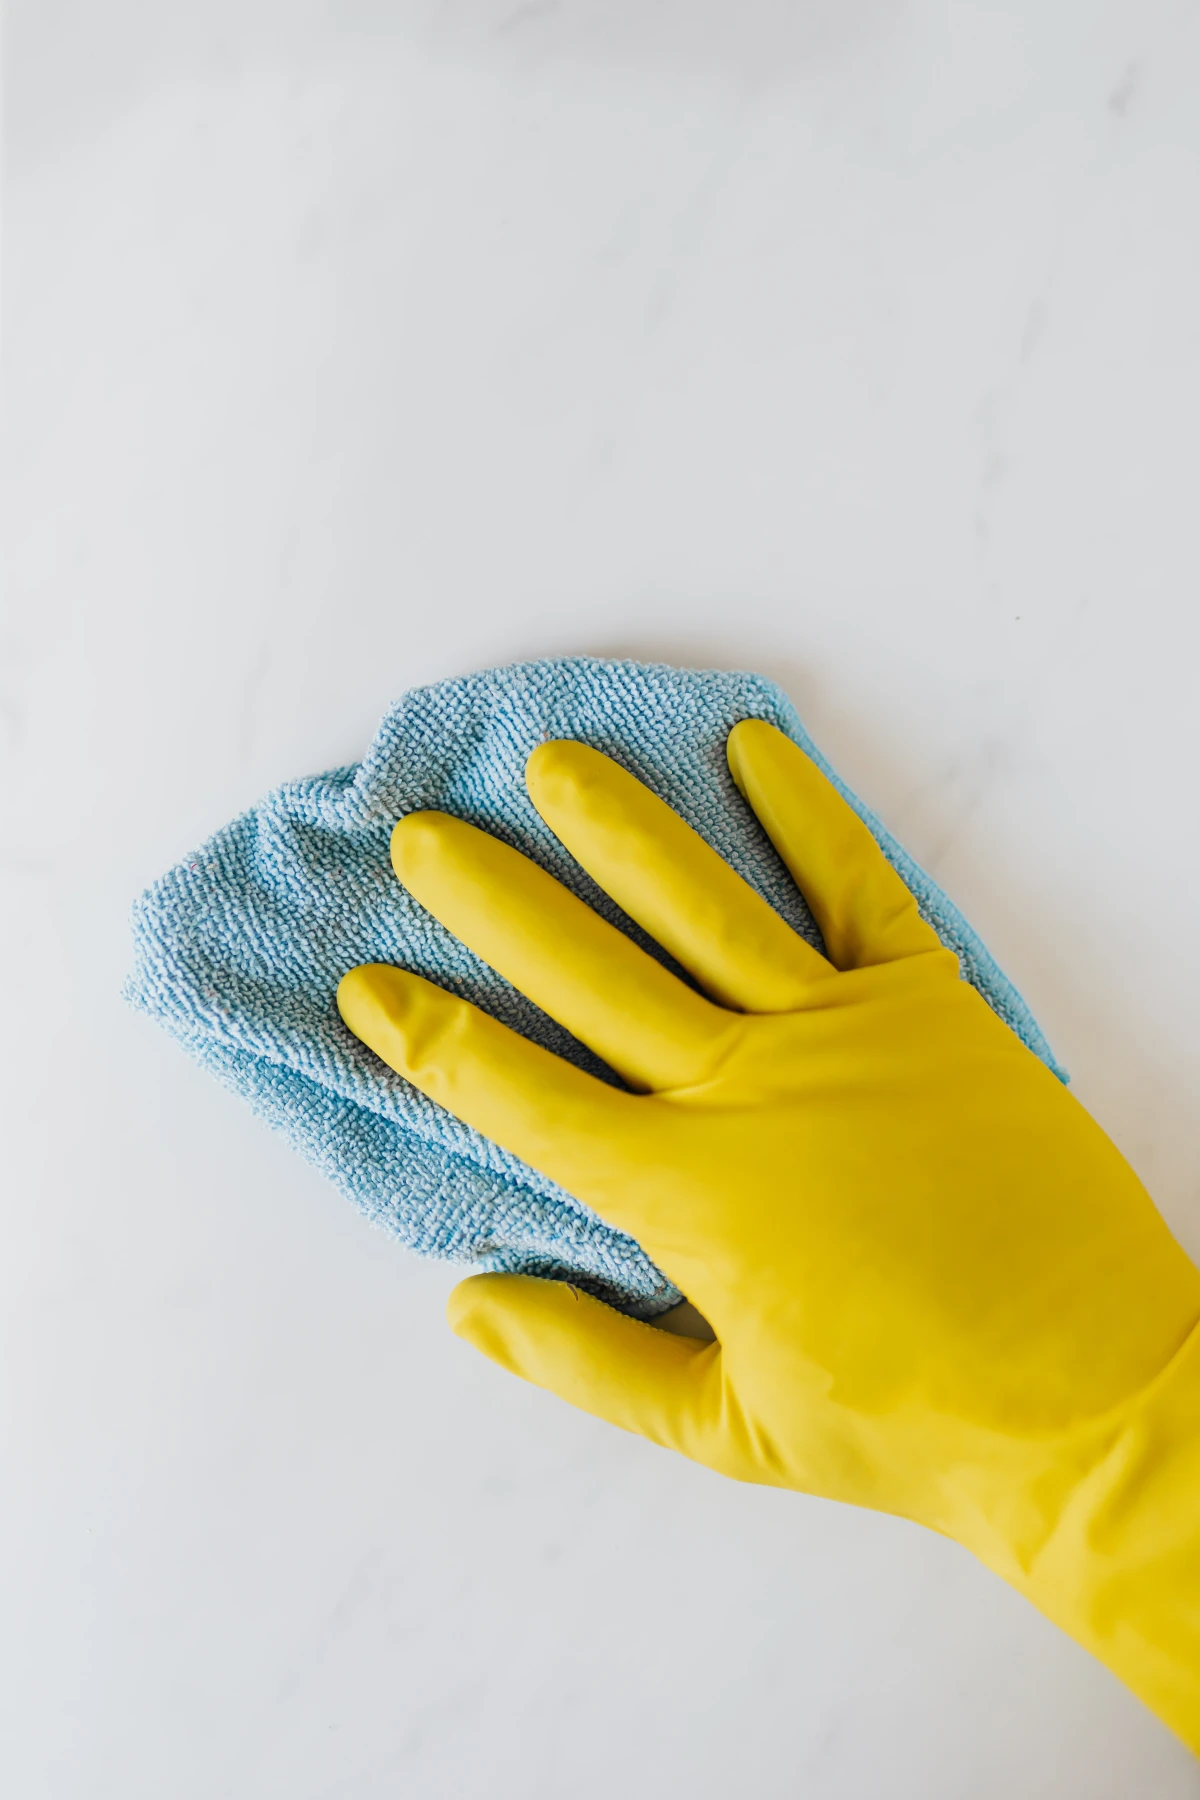 rubber glove and cleaning rag